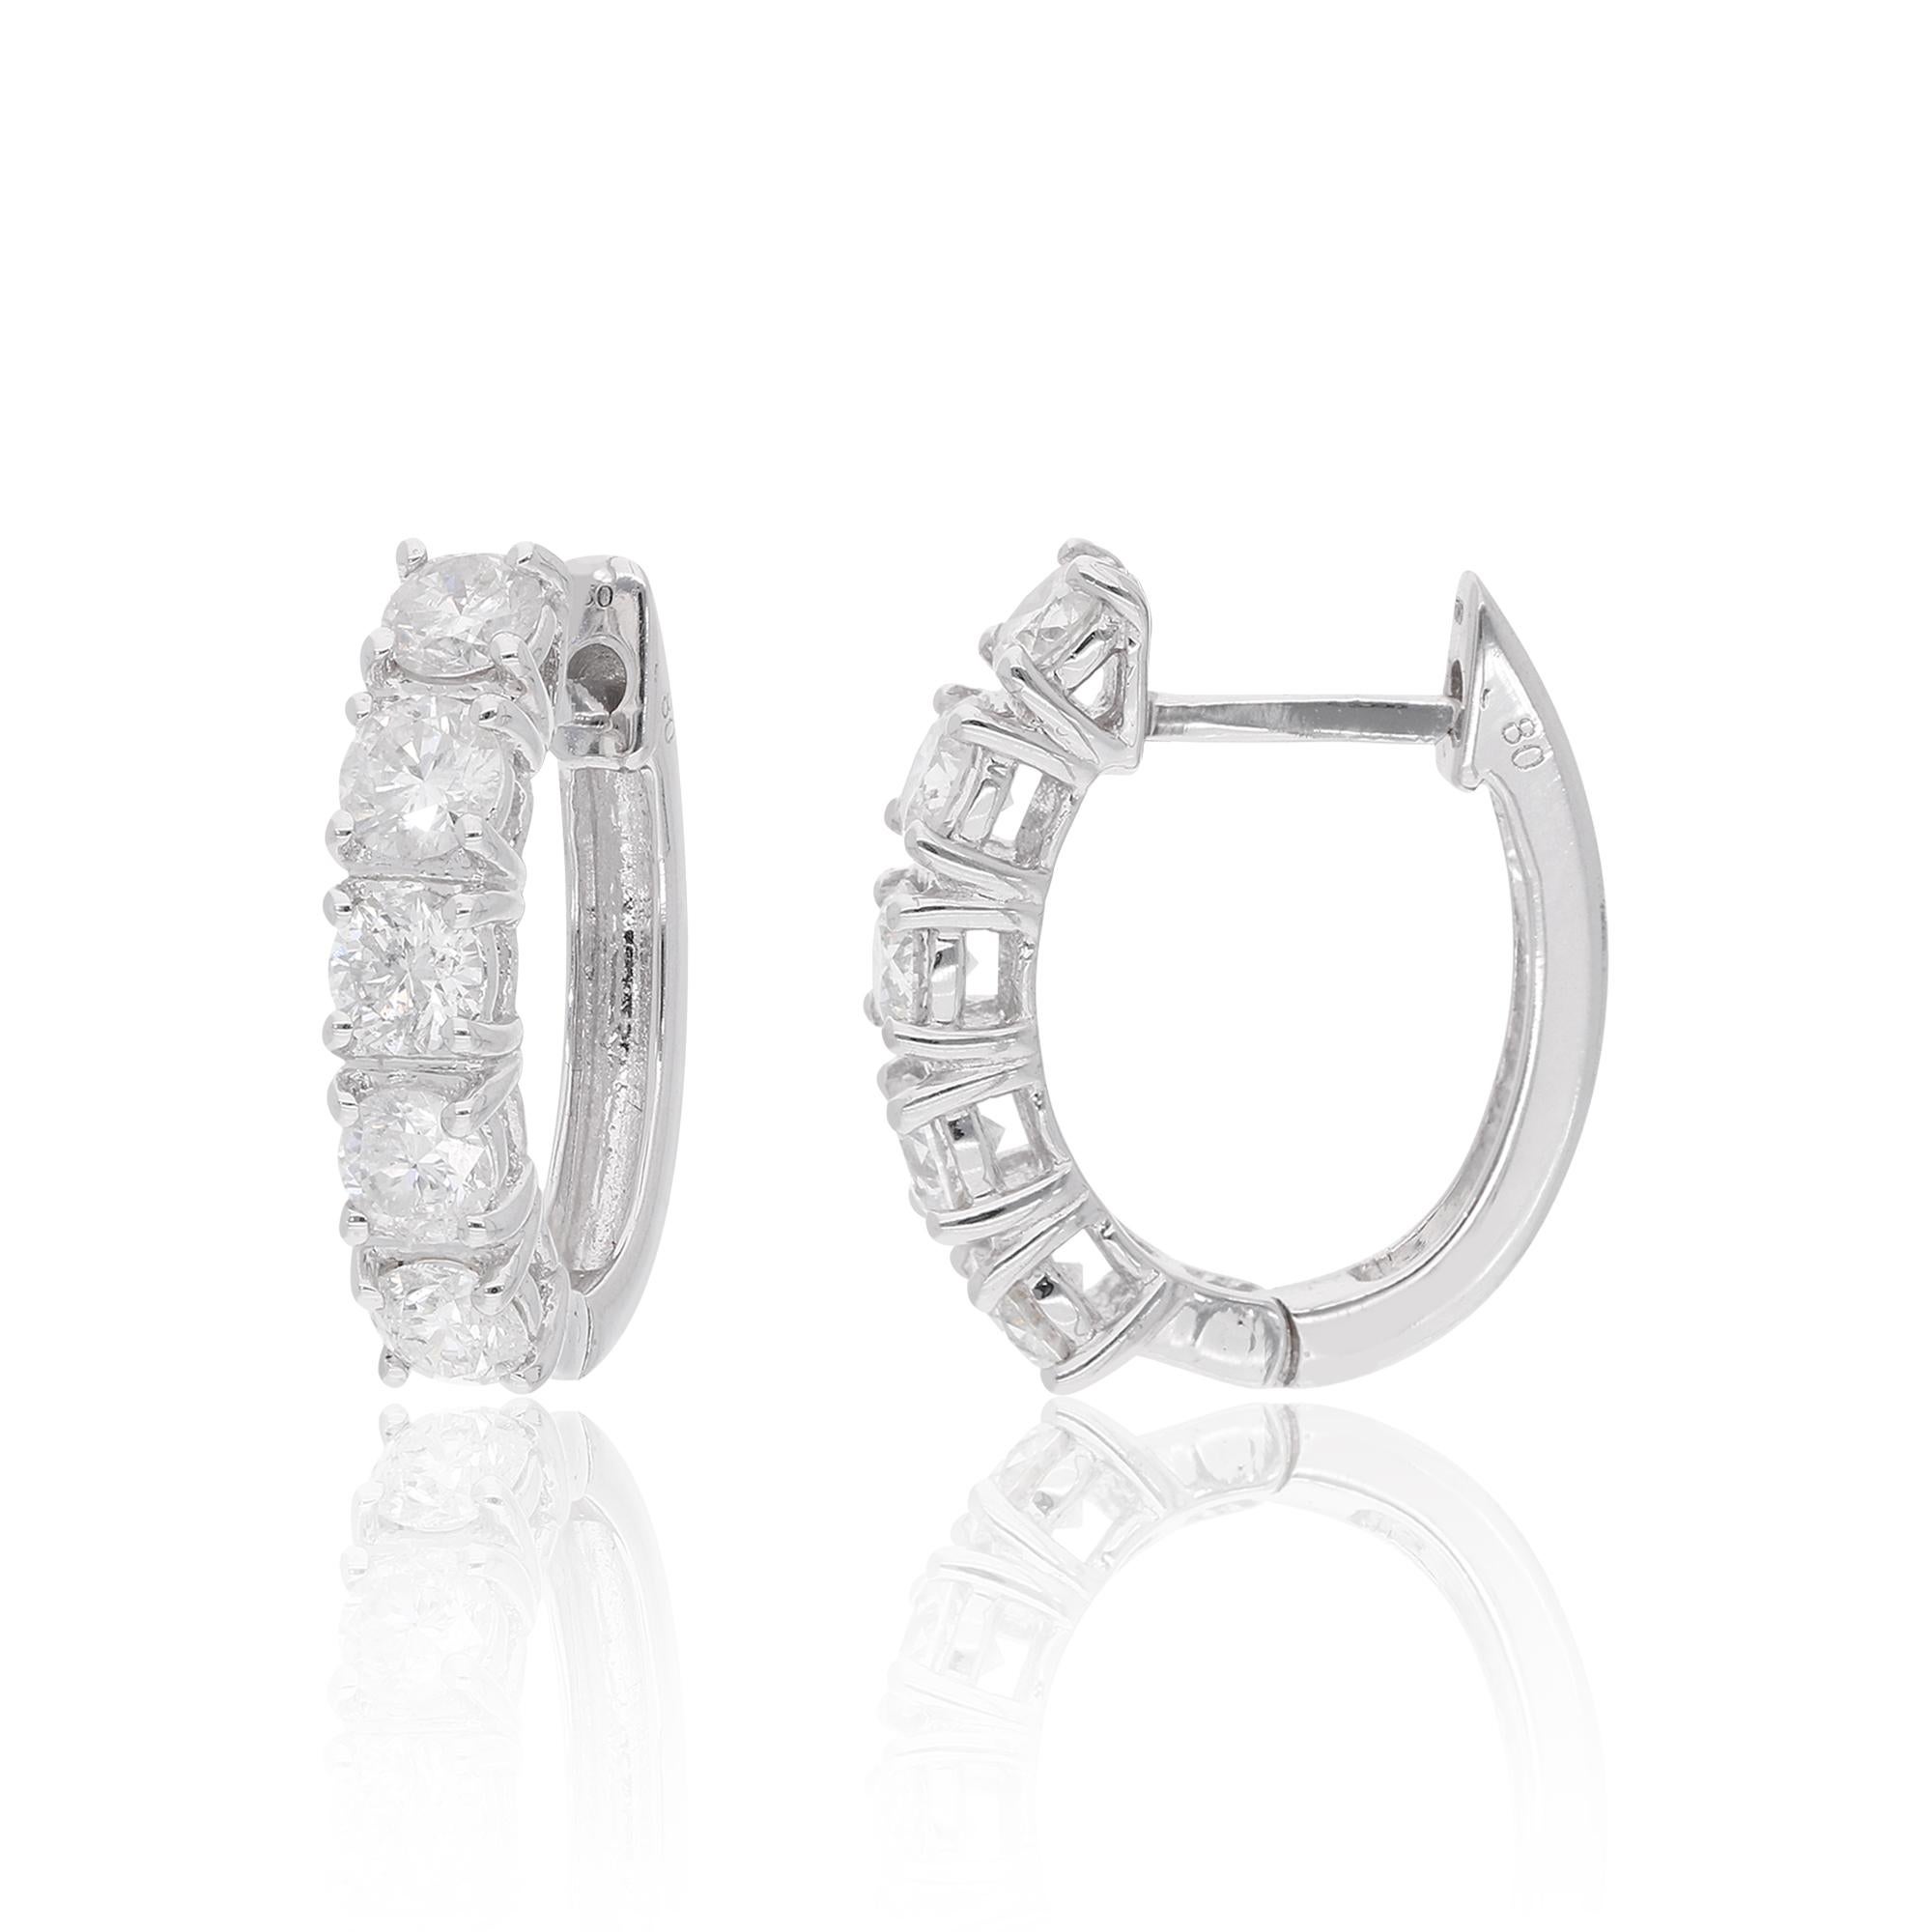 These Dainty Diamond Hoop Earrings with 2.2 ct. Genuine Diamonds are a promise of perfection and purity. These earrings are set in 18k Solid White Gold. You can choose these huggies in 10k/14k/18k Rose Gold/White Gold/Yellow Gold.

These are perfect